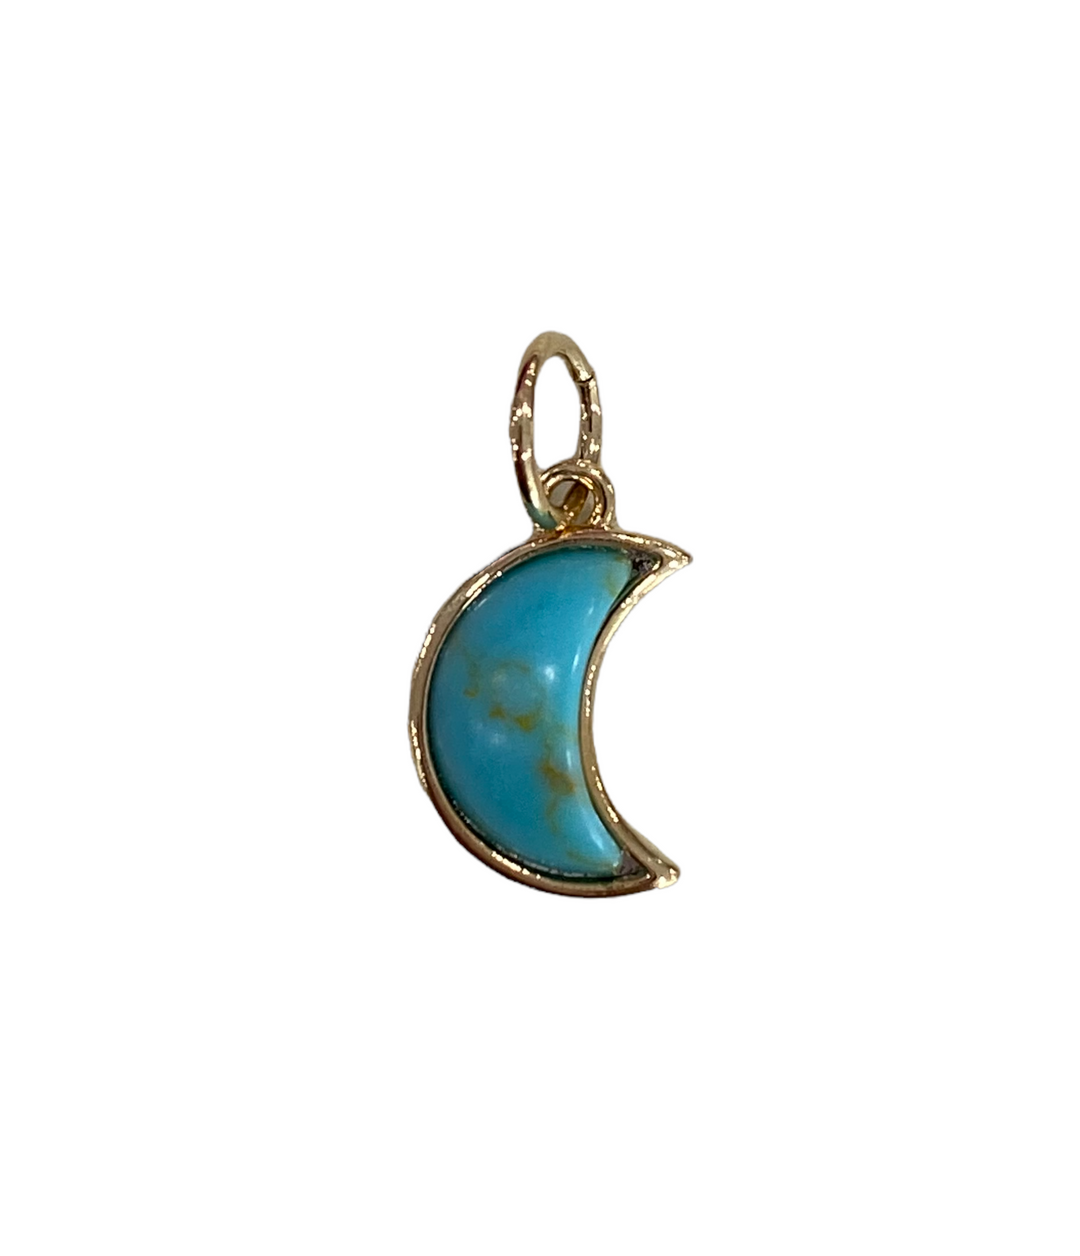 GOLD TURQUOISE CRESENT MOON CHARM